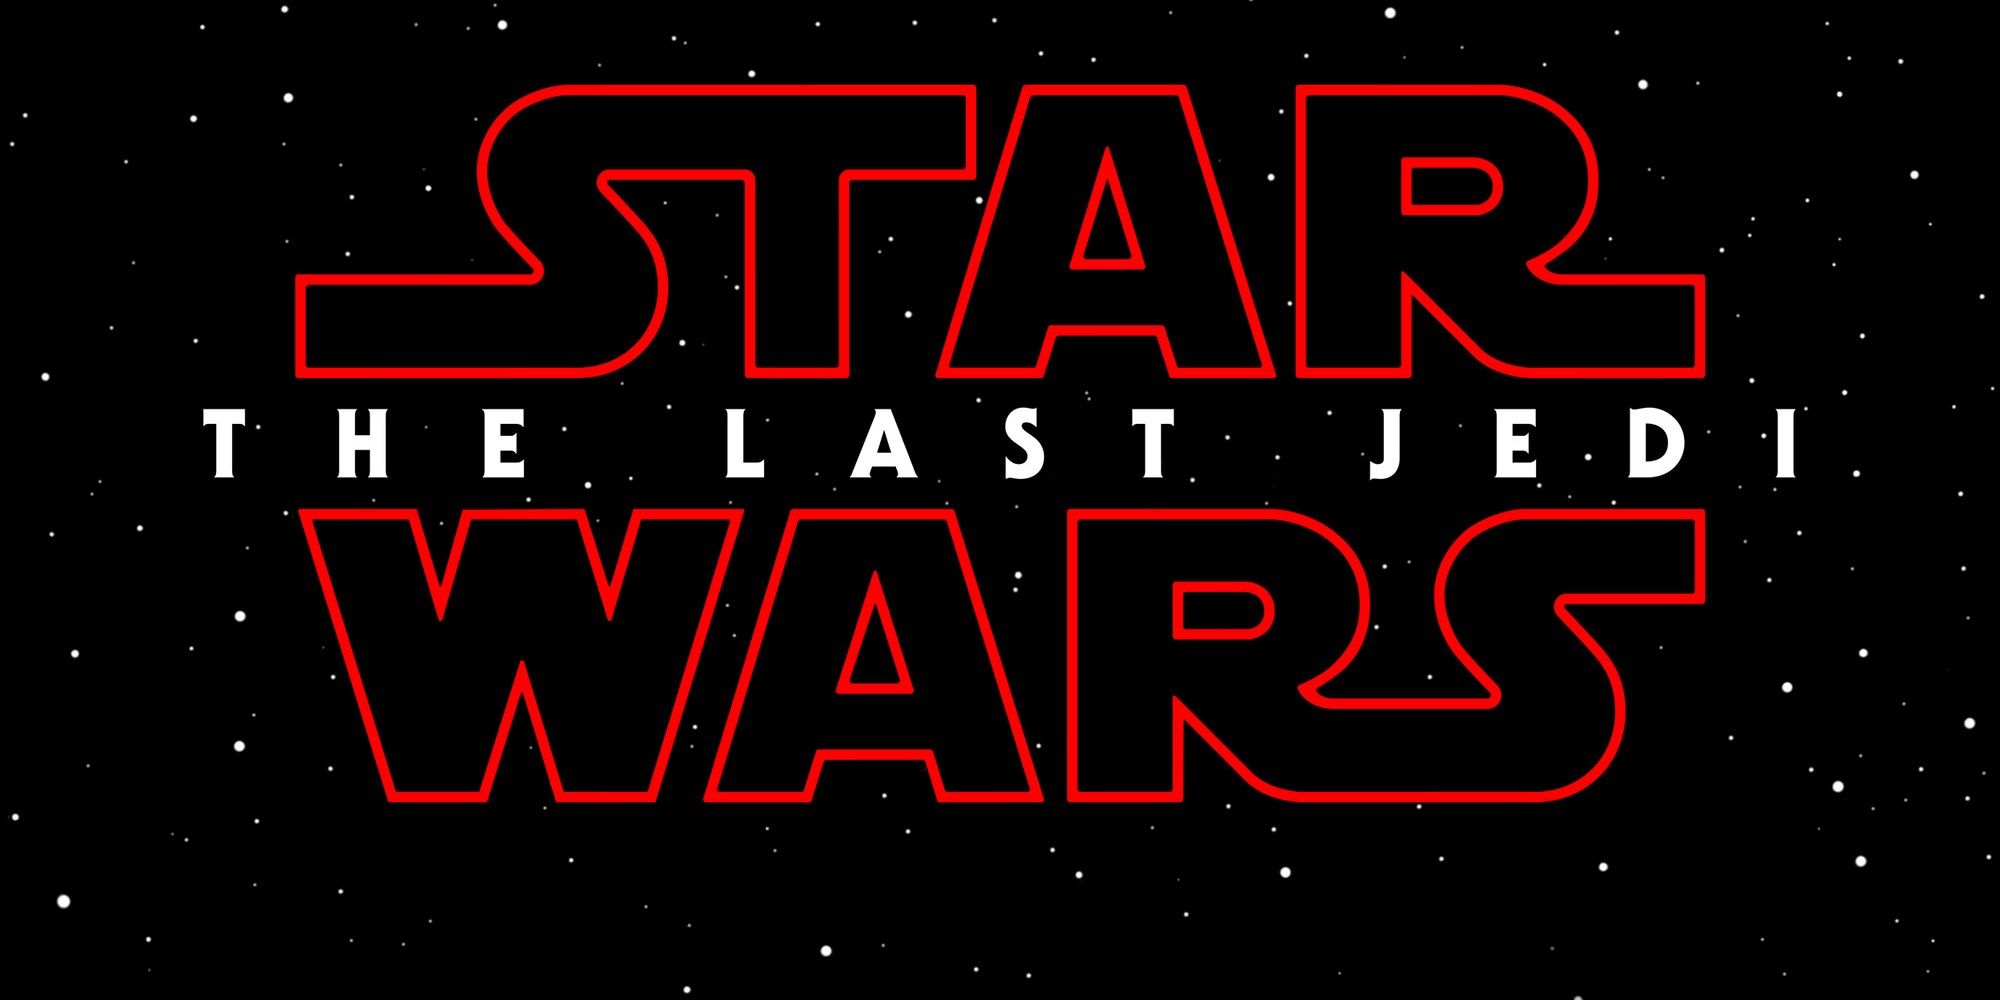 The Last Jedi Was Terrible, Says Alan Dean Foster